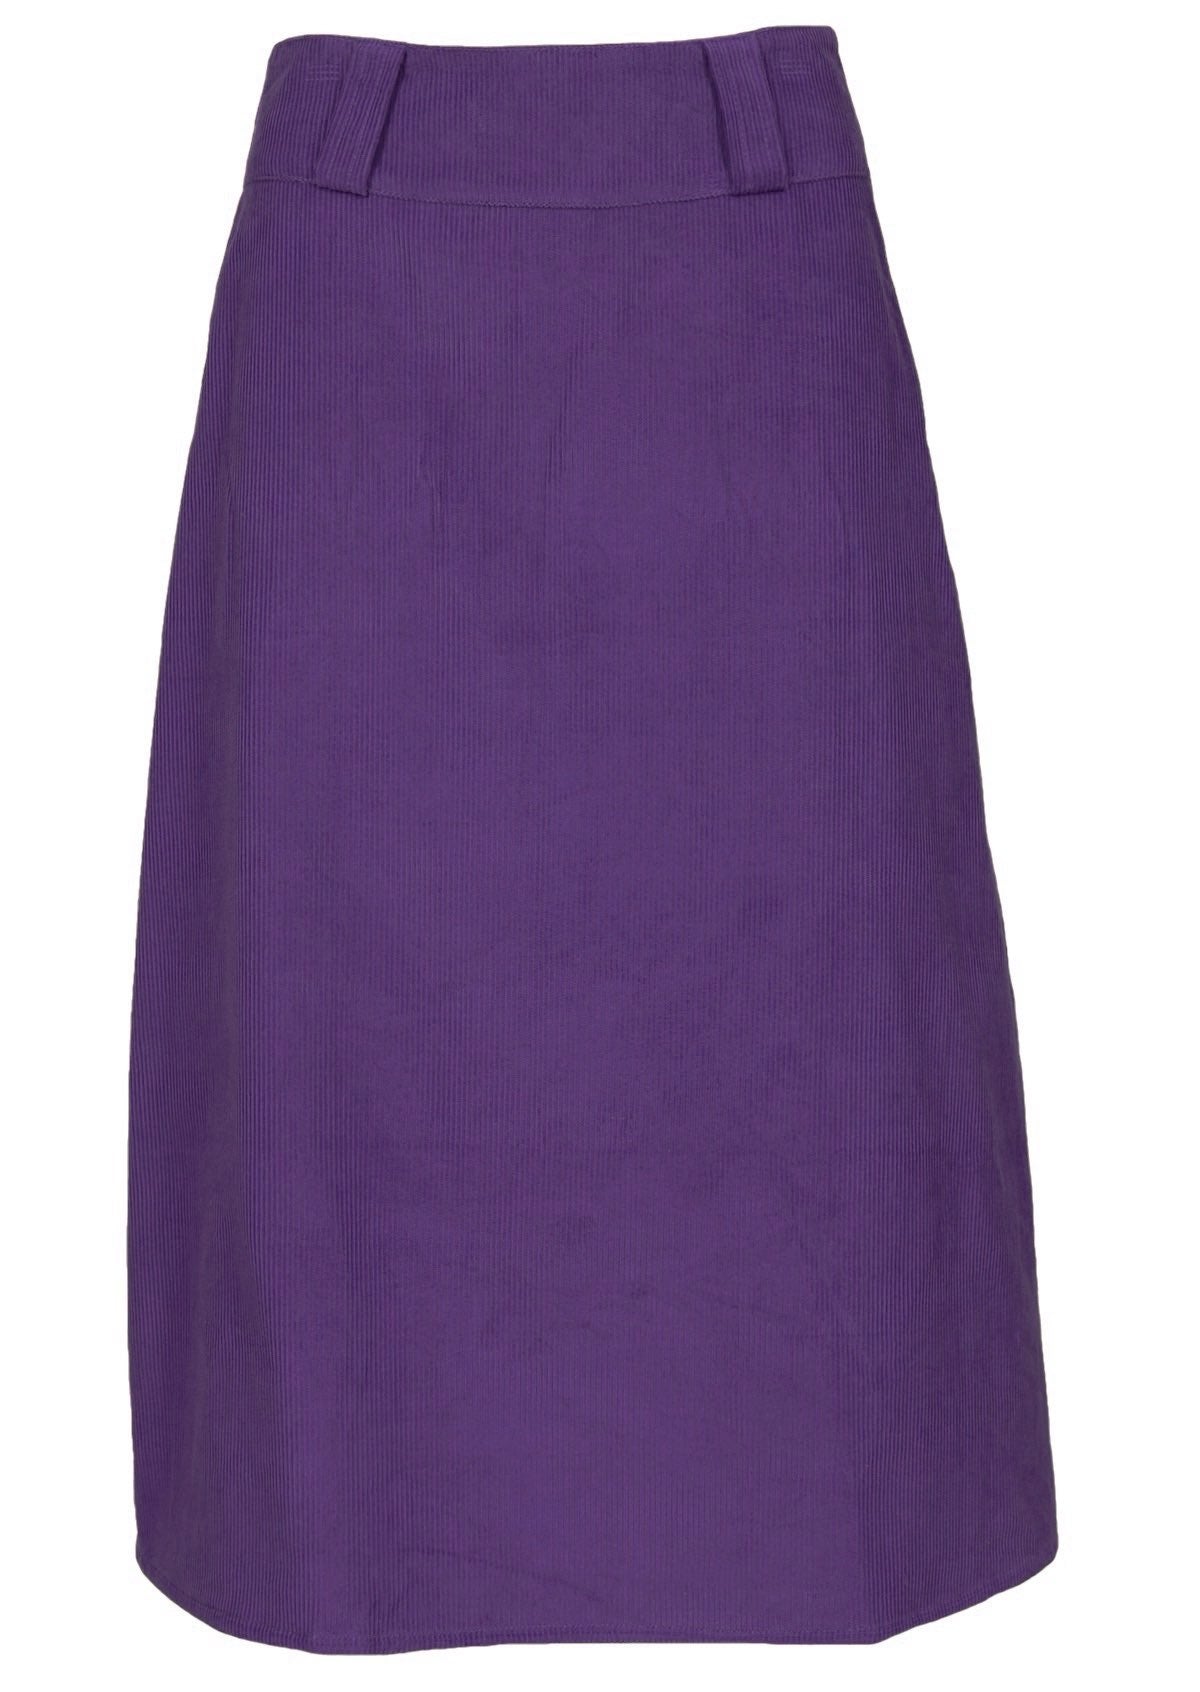 100% cotton corduroy skirt in a purple fabric. 